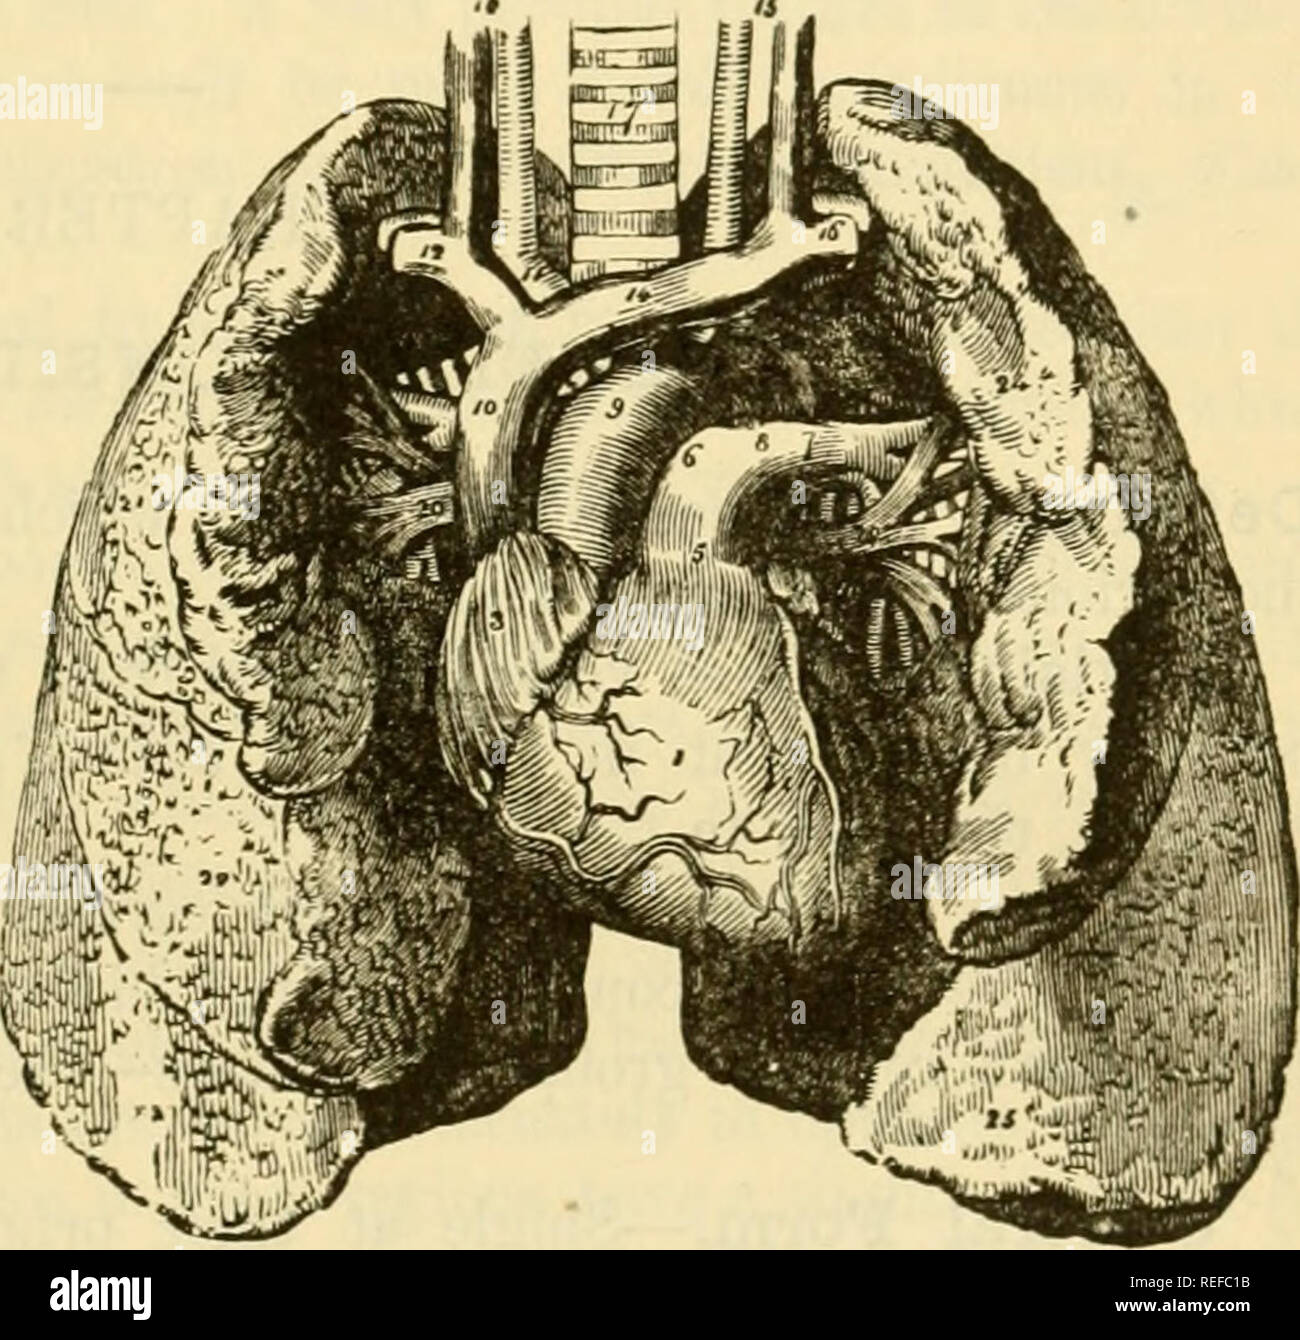 . The comparative anatomy of the domesticated animals. Horses; Veterinary anatomy. THE HEART. 59S the auricles, the effect of which is the repletion of the ventricles. 3. The systole of ths ventricles, propelling the blood into the arterial systems ; after which comes another period of general diastole. Fig. 359. DiPPEBENTIAL CHARACTERS IN THE HeART OP THE OTHER ANIMALS. In the Ox, Sheep, and Goat, the ventricular mass of the heart is more ropjularly conical than in Solipetls; it has three longitudinal grooves, one of whirh is accessory and passes behind the (left) ventricle. In the Ox two sma Stock Photo